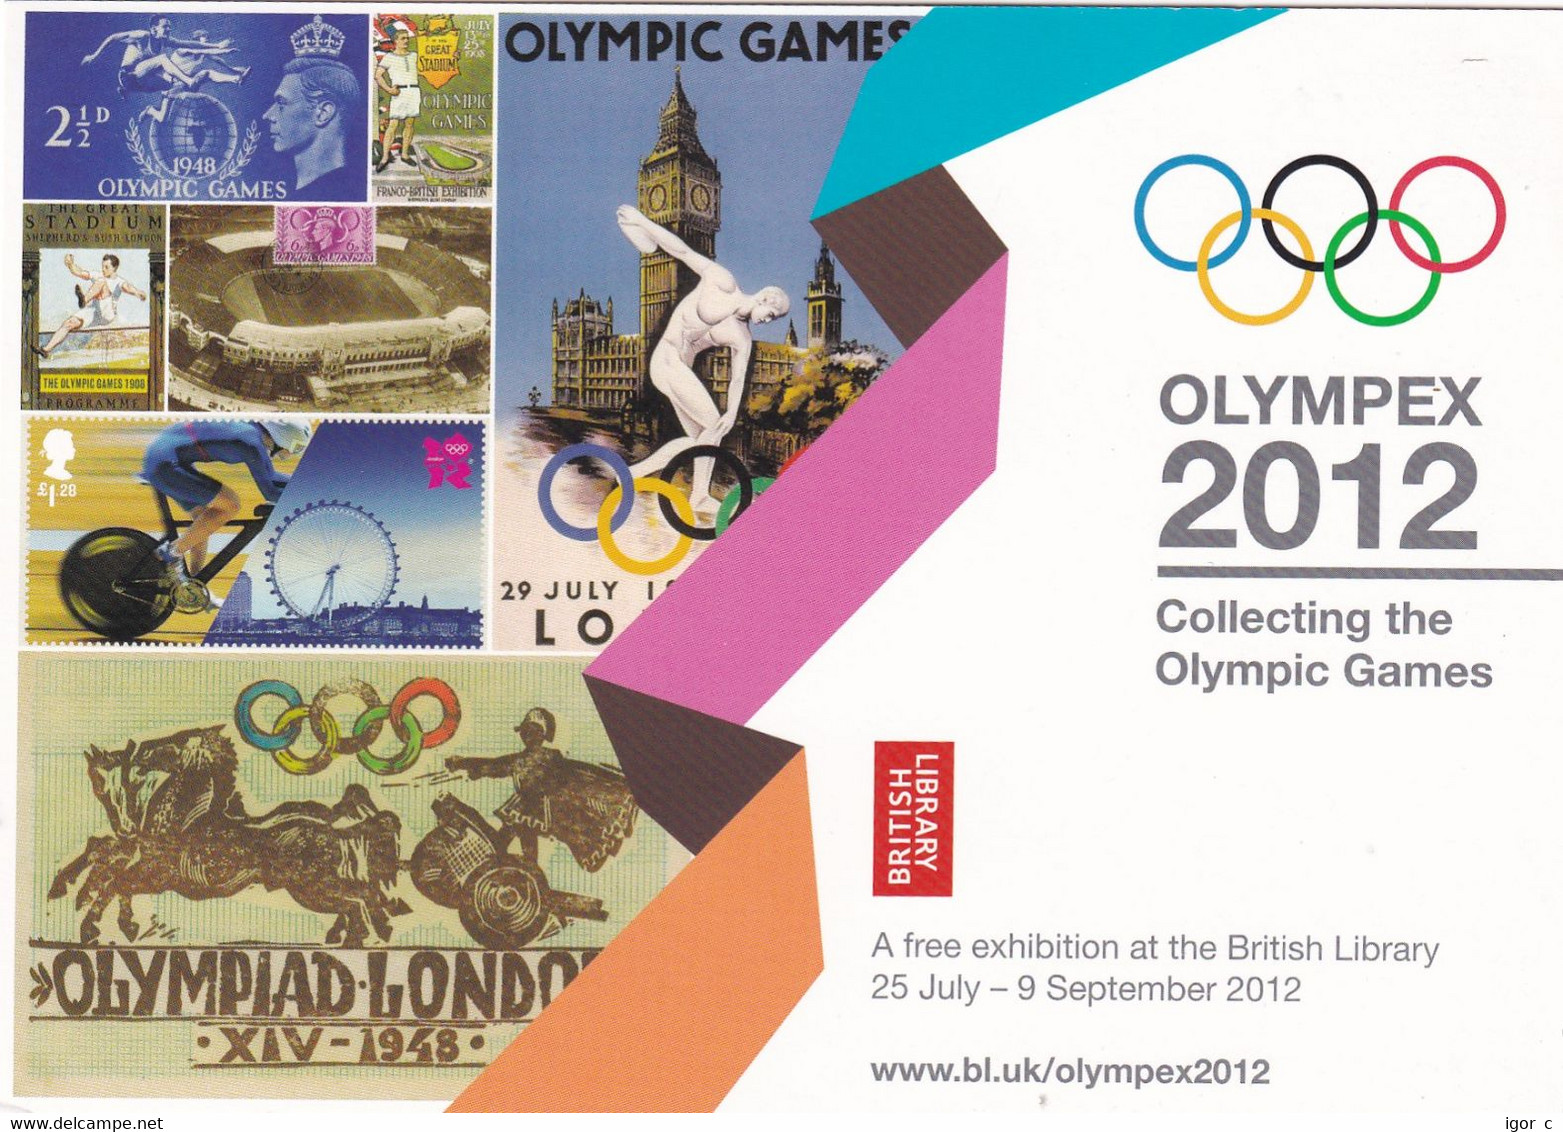 United Kingdom UK 2012 Card: Olympic Games London; Olympex 2012 STADION E20 CANCELLATION; Diving; Chatiot Race Cycling - Sommer 2028: Los Angeles